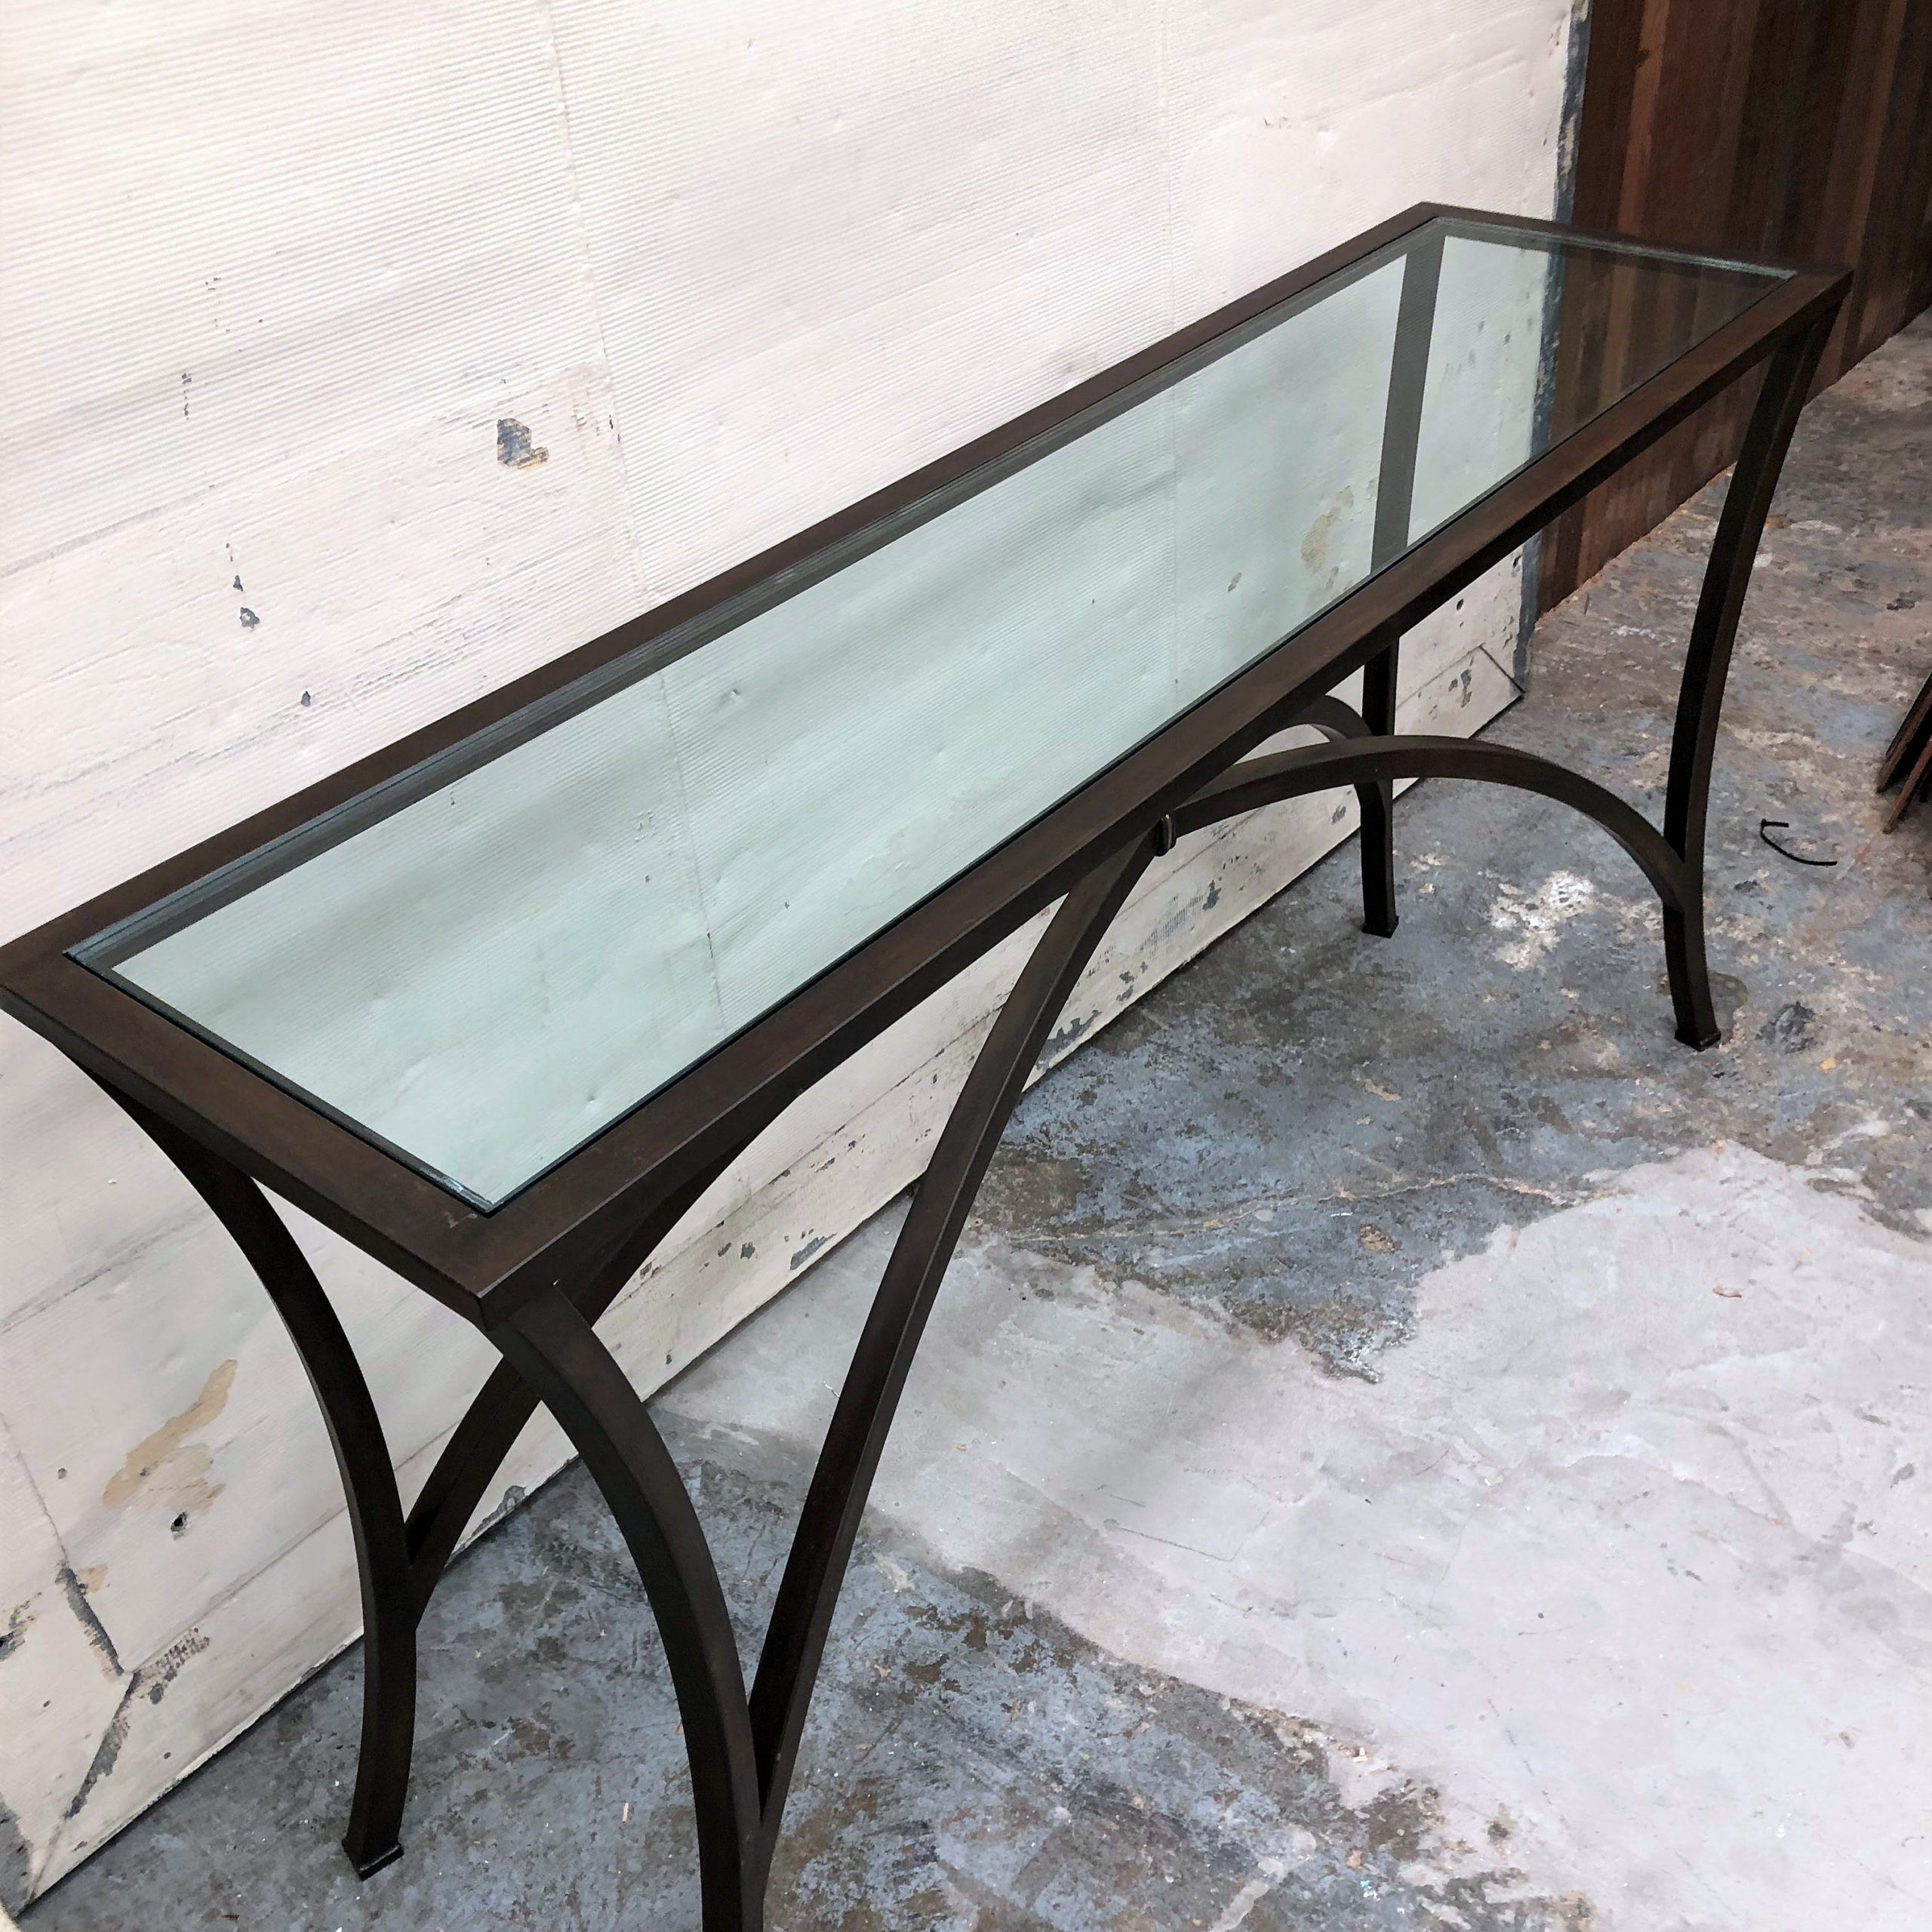 [%oil Rubbed Bronze & Glass Console Table [12 56 51.10 0002 With Regard To Fashionable Glass Console Tables|glass Console Tables Regarding Well Known Oil Rubbed Bronze & Glass Console Table [12 56 51.10 0002|fashionable Glass Console Tables Intended For Oil Rubbed Bronze & Glass Console Table [12 56 51.10 0002|latest Oil Rubbed Bronze & Glass Console Table [12 56  (View 10 of 10)